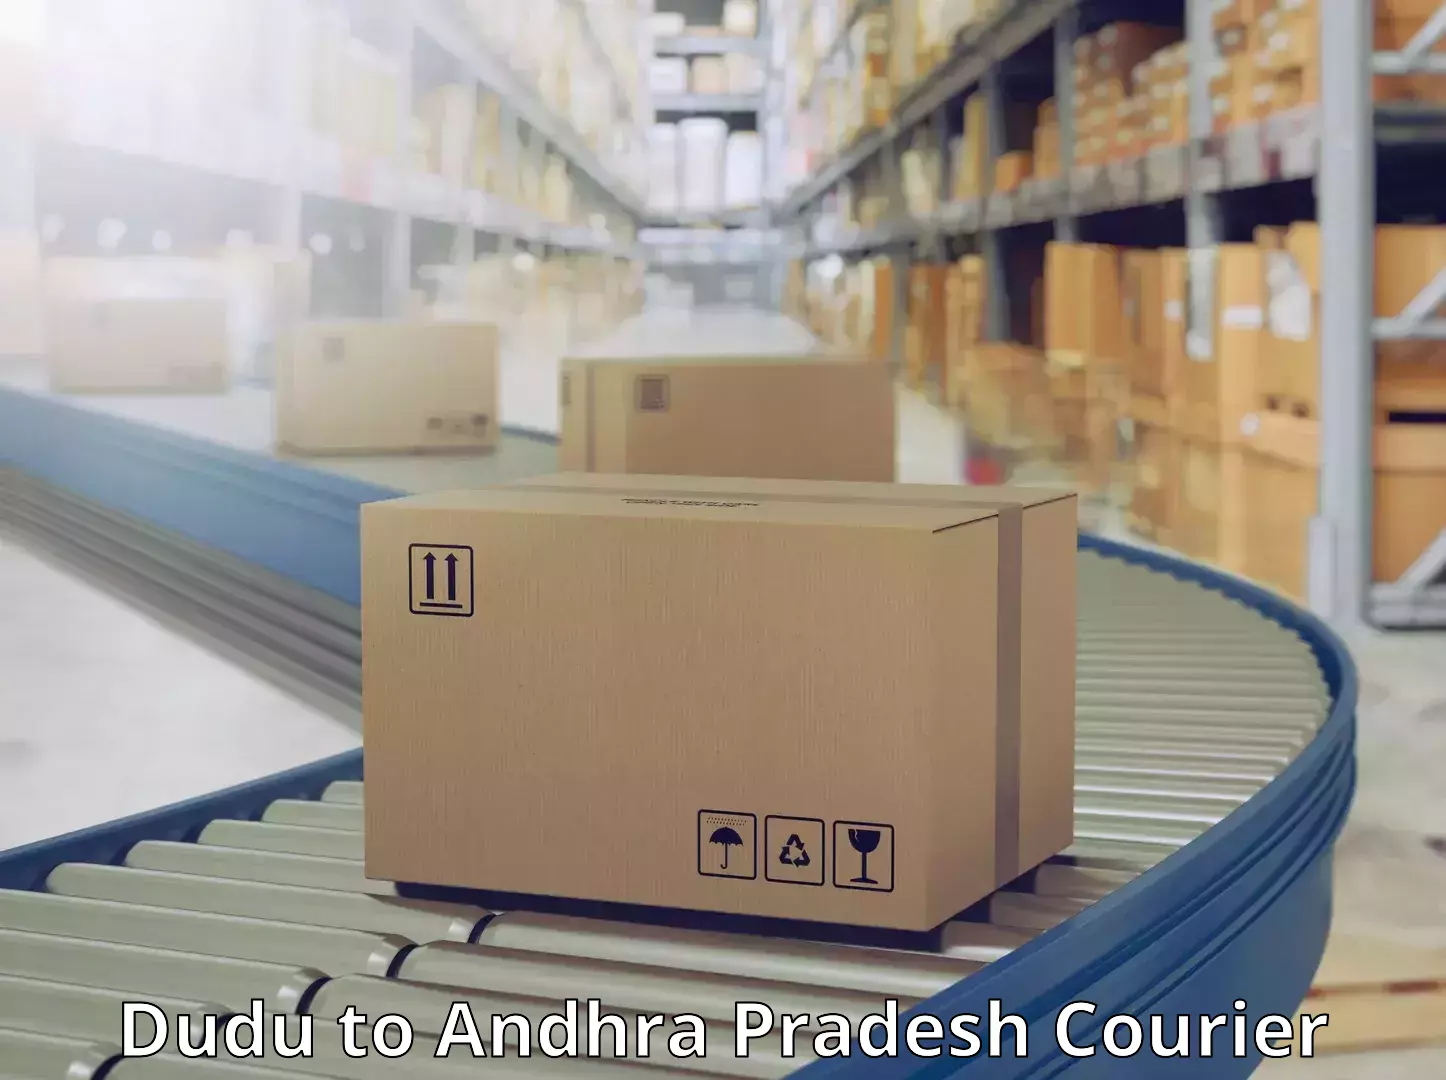 Small parcel delivery in Dudu to Visakhapatnam Port